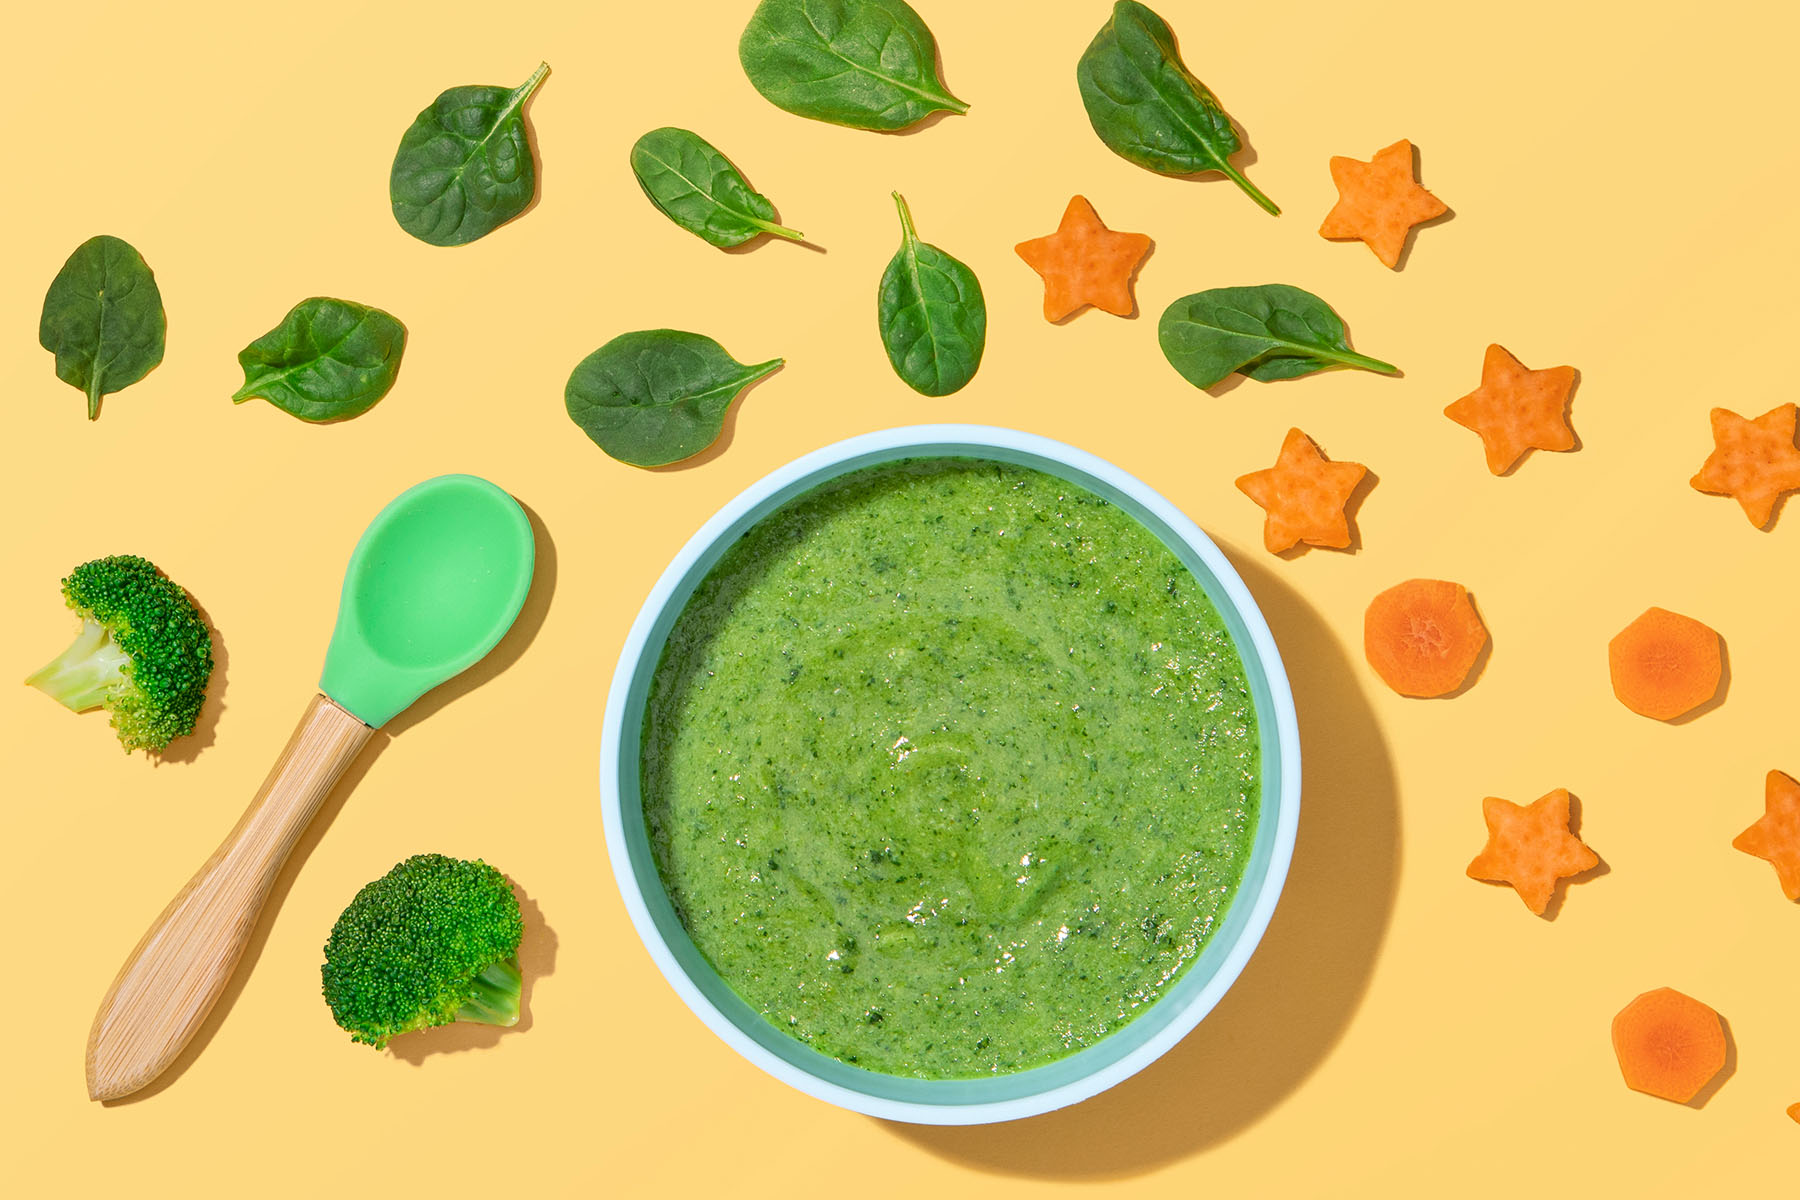 Bowl of blended green veggies with spoon and carrot, broccoli and spinach surrounding